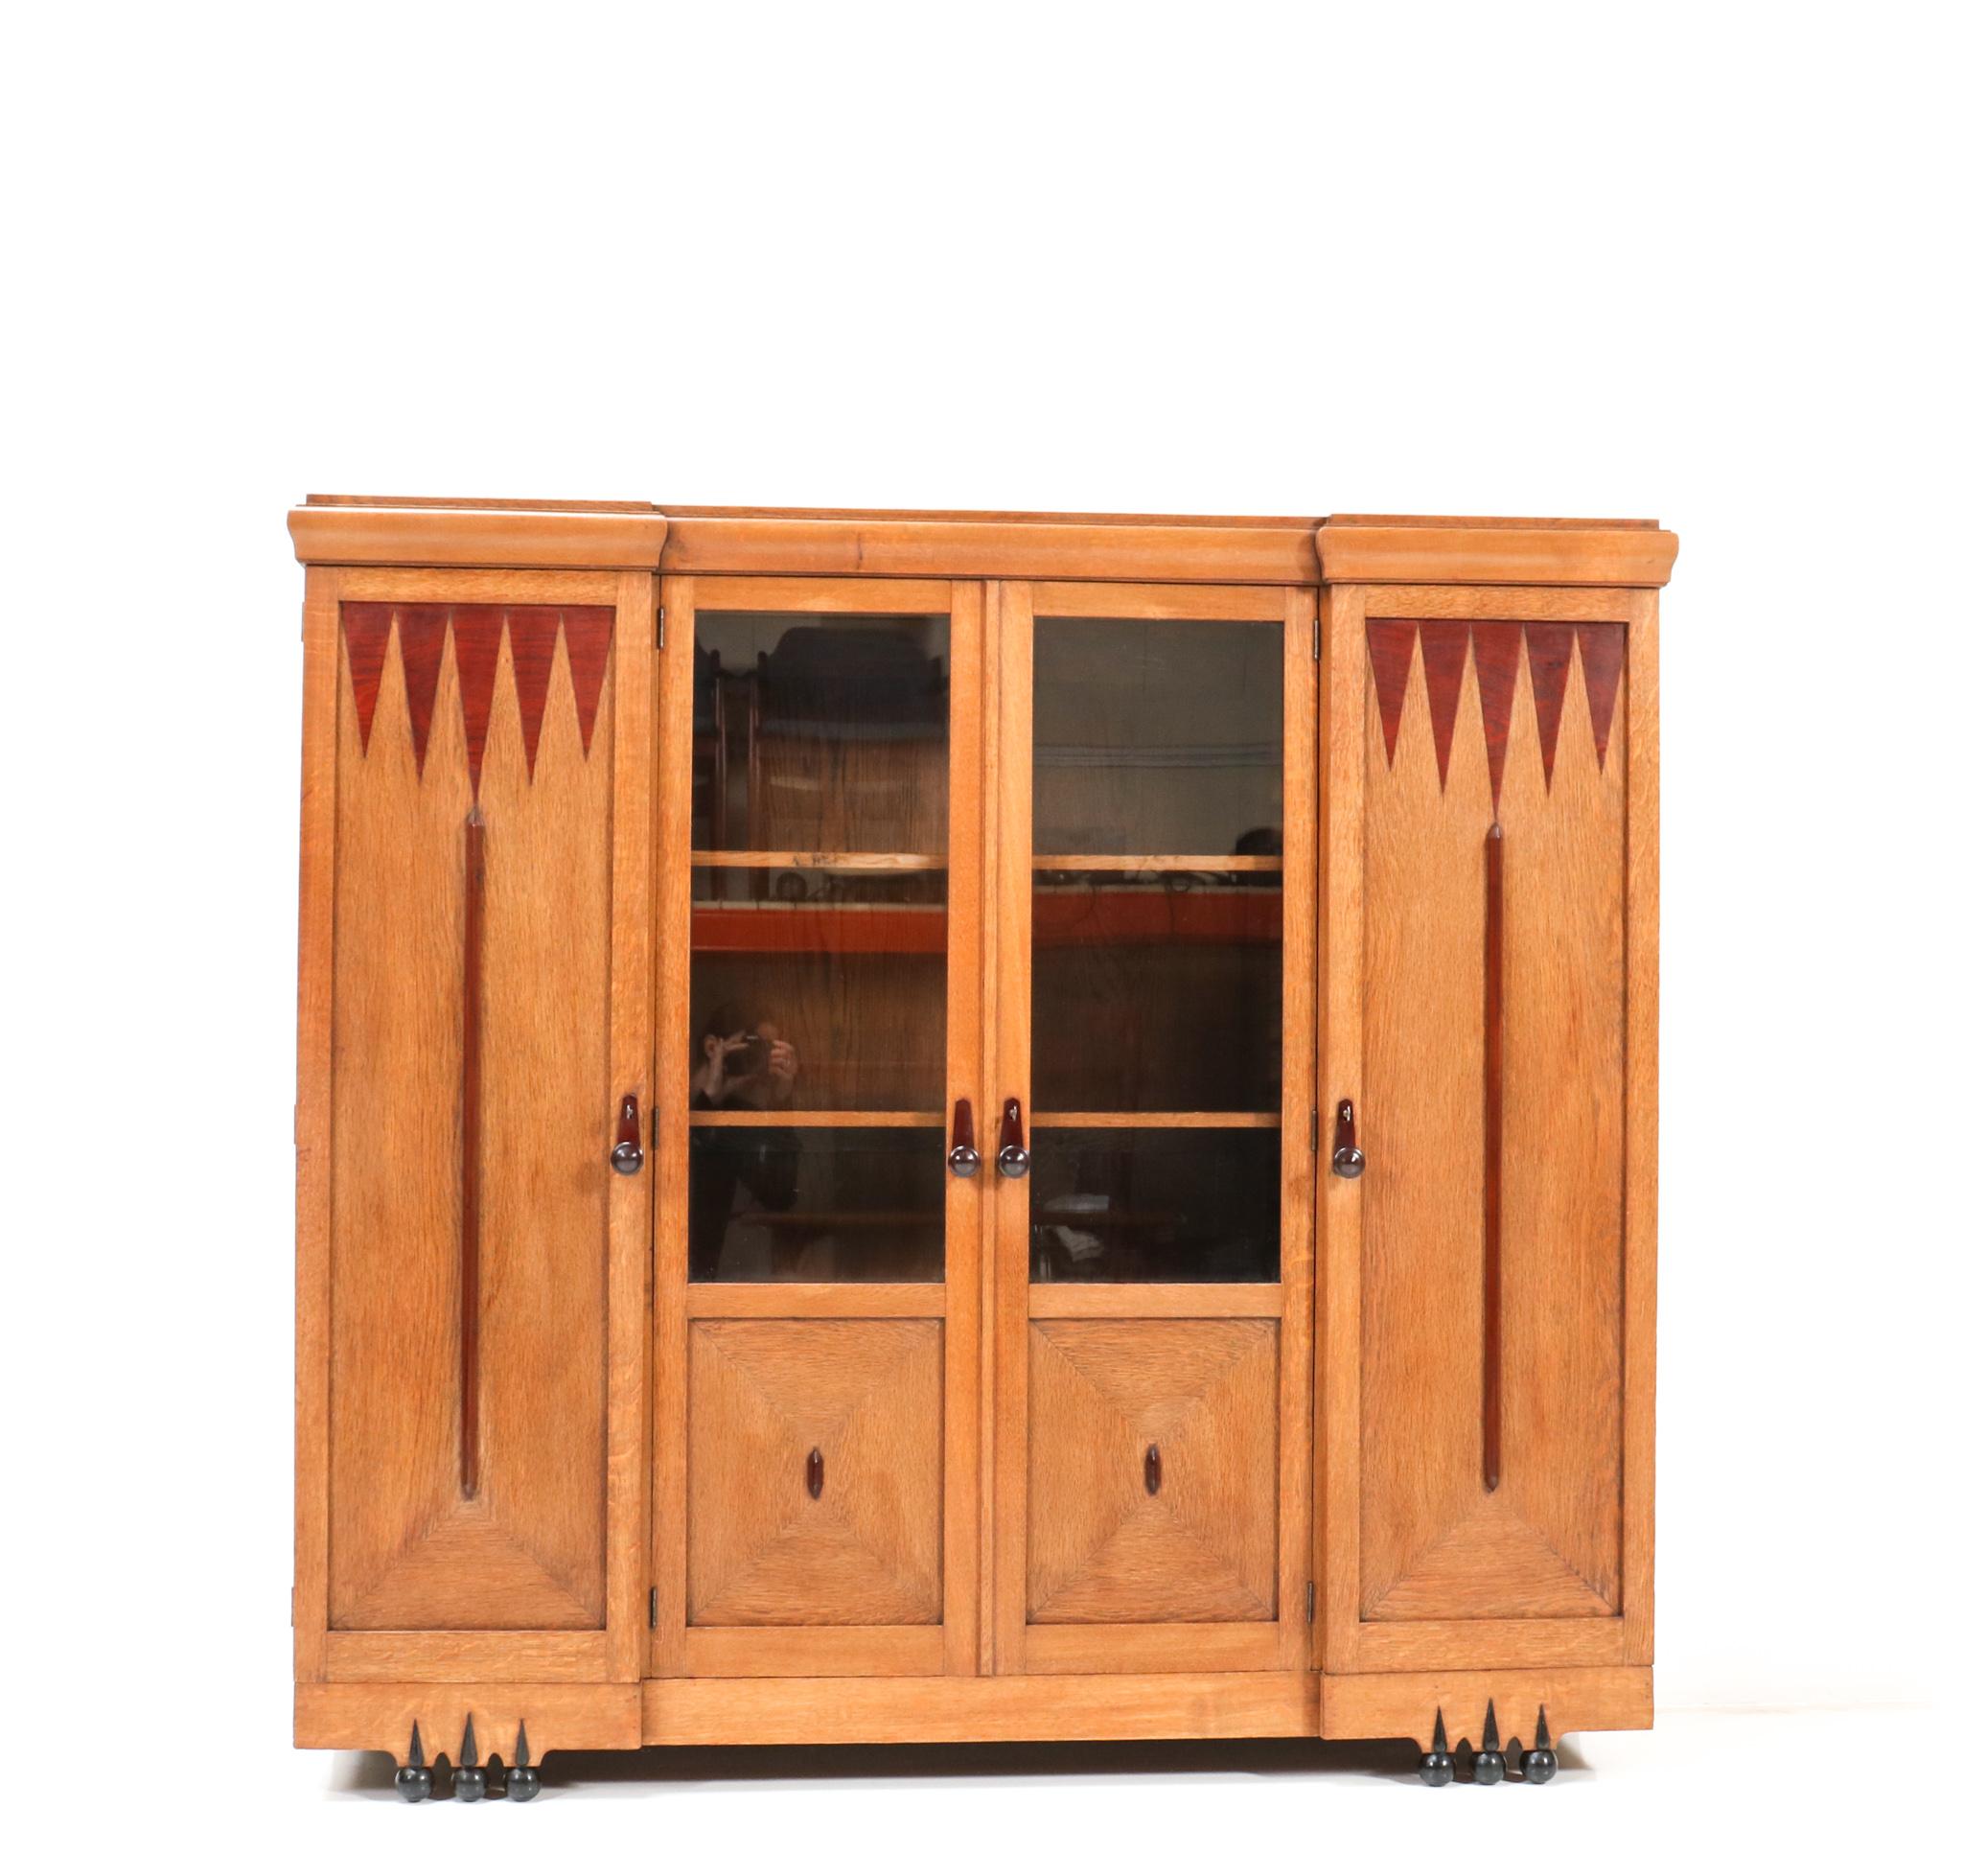 Magnificent and rare Art Deco Amsterdamse School bookcase.
Design by Max Coini Amsterdam.
Striking Dutch design from the 1920s.
Solid oak with original solid padouk knobs on the four doors.
The typical Amsterdamse School style of this unusual